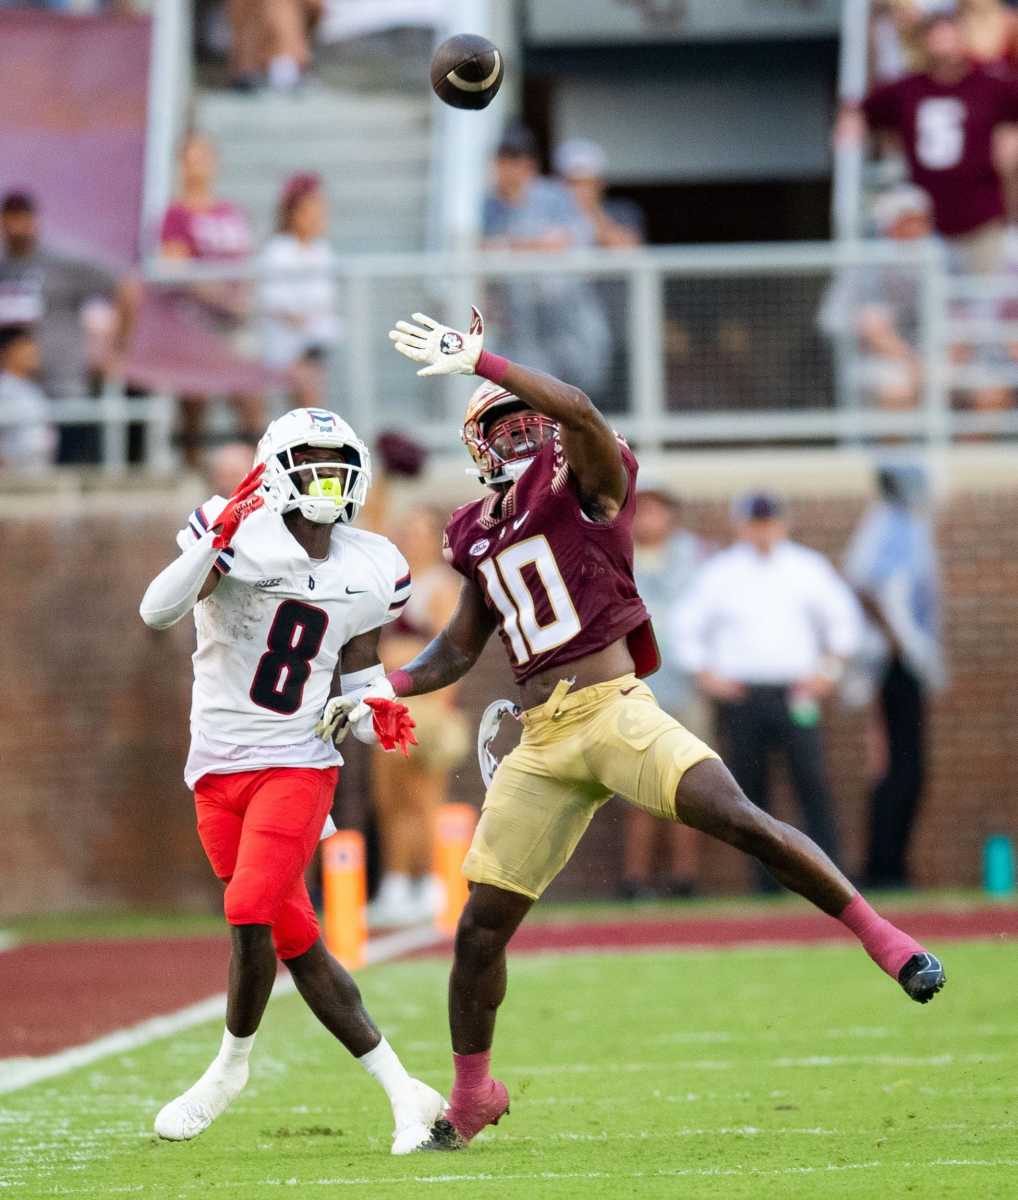 Florida State defensive back Jammie Robinson (10) leaps in front of his opponent to try to intercept the ball. The Florida State Seminoles hosted the Duquesne Dukes at Doak Campbell Stadium on Saturday, Aug. 27, 2022. | Alicia Devine/Tallahassee Democrat / USA TODAY NETWORK